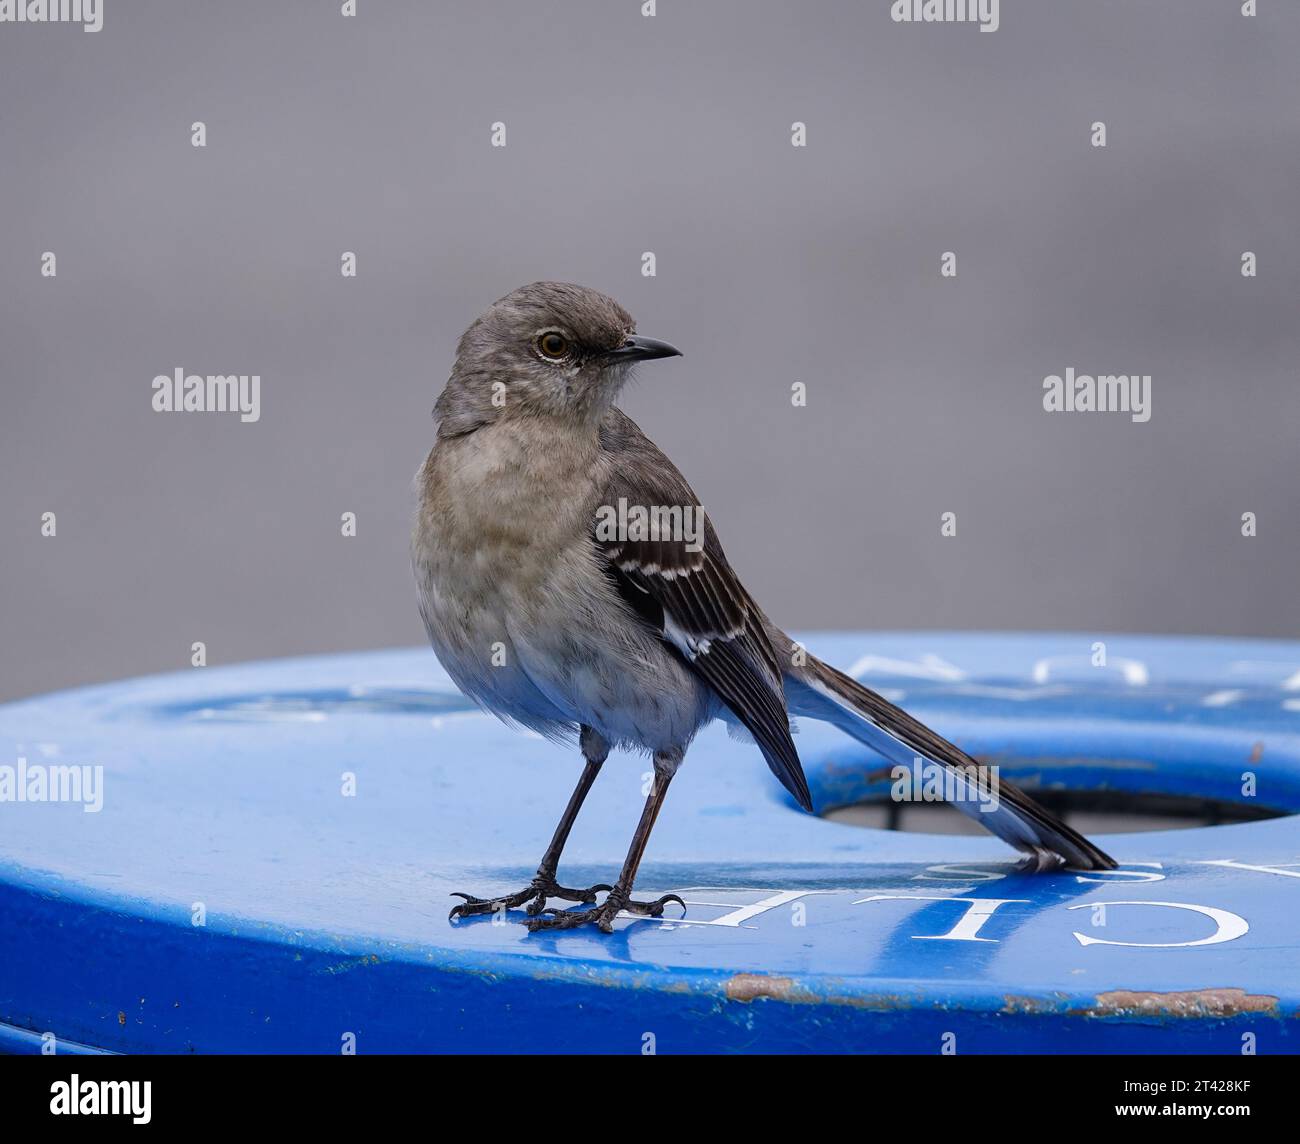 Close up of a grey Mockingbird perched on the rim of a blue garbage can. Stock Photo